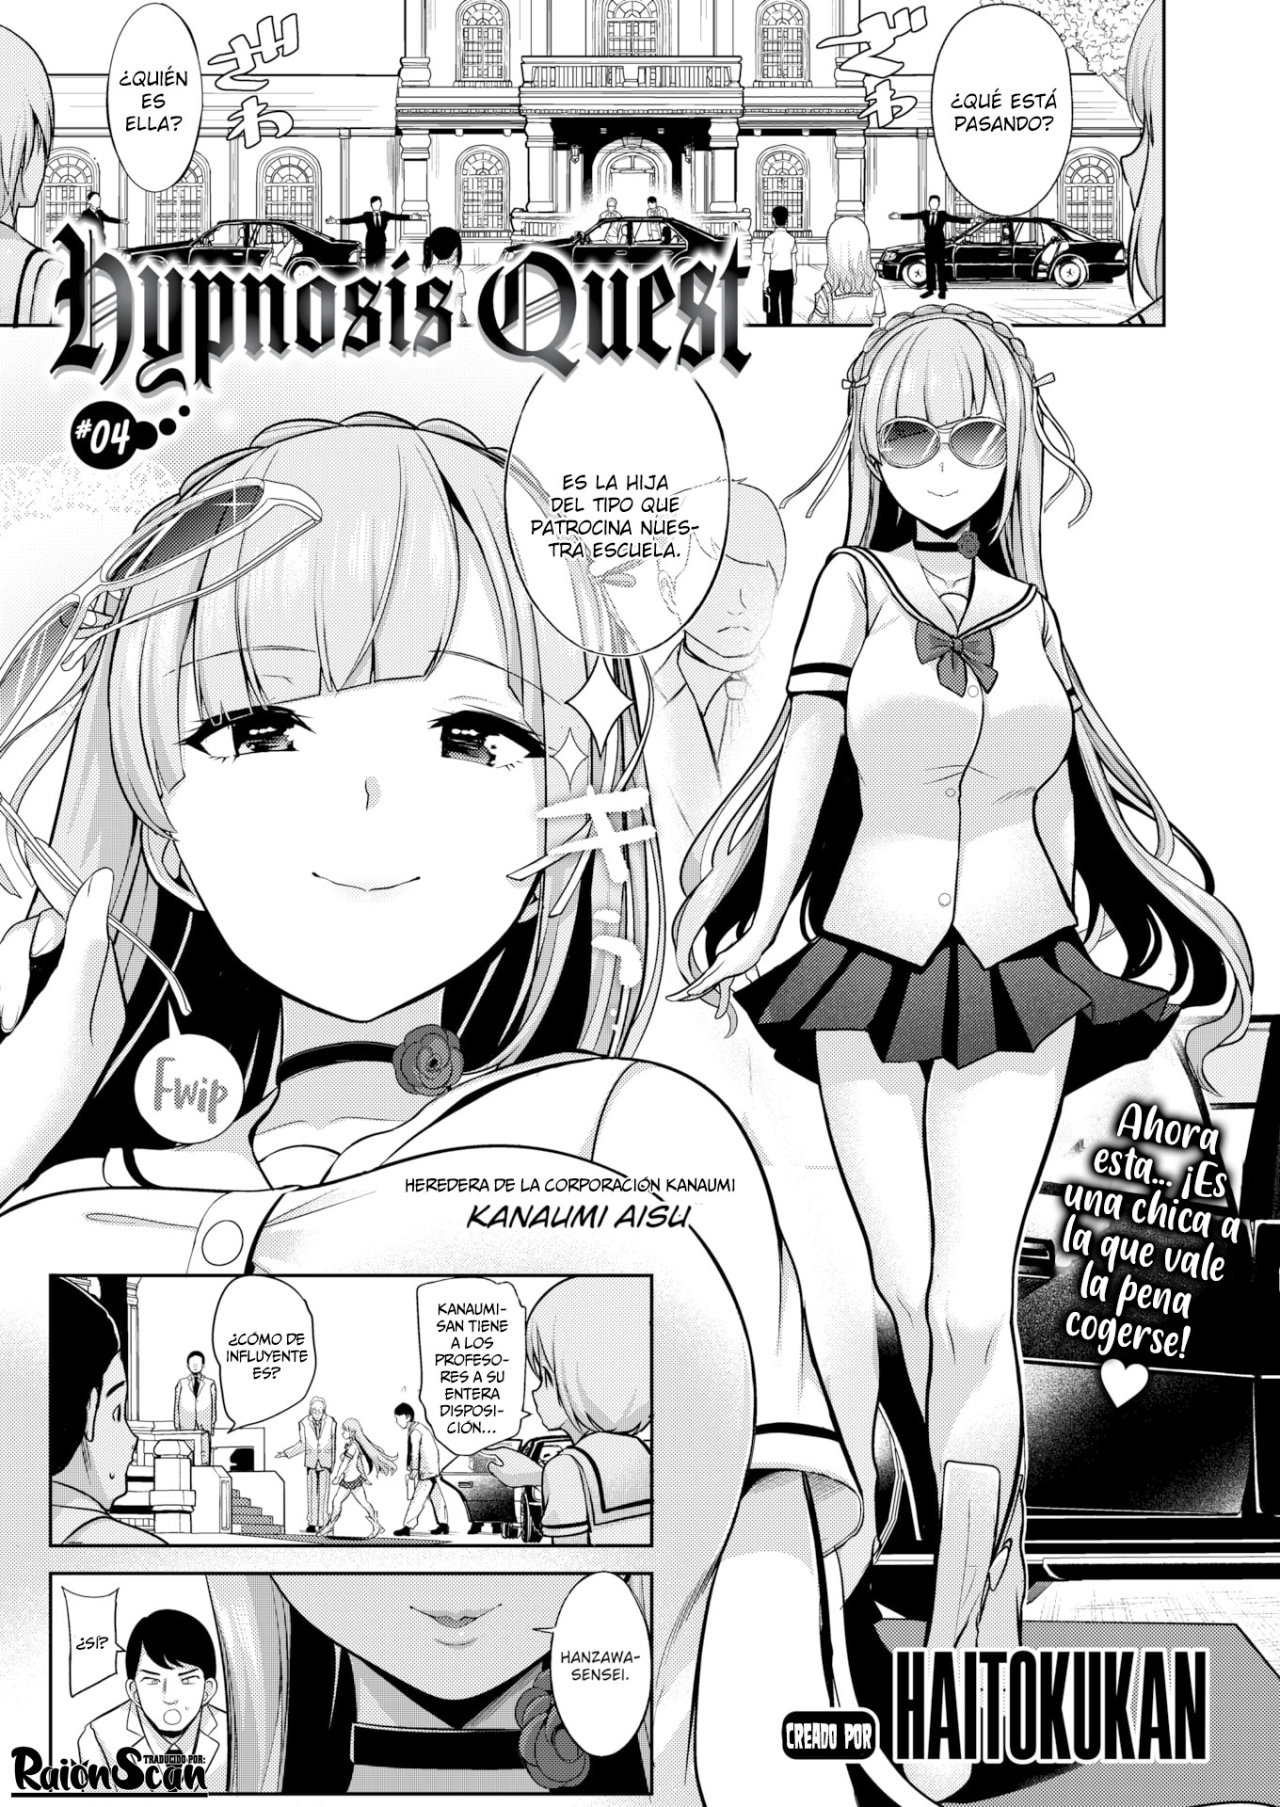 Hypnosis Quest 04 - 2